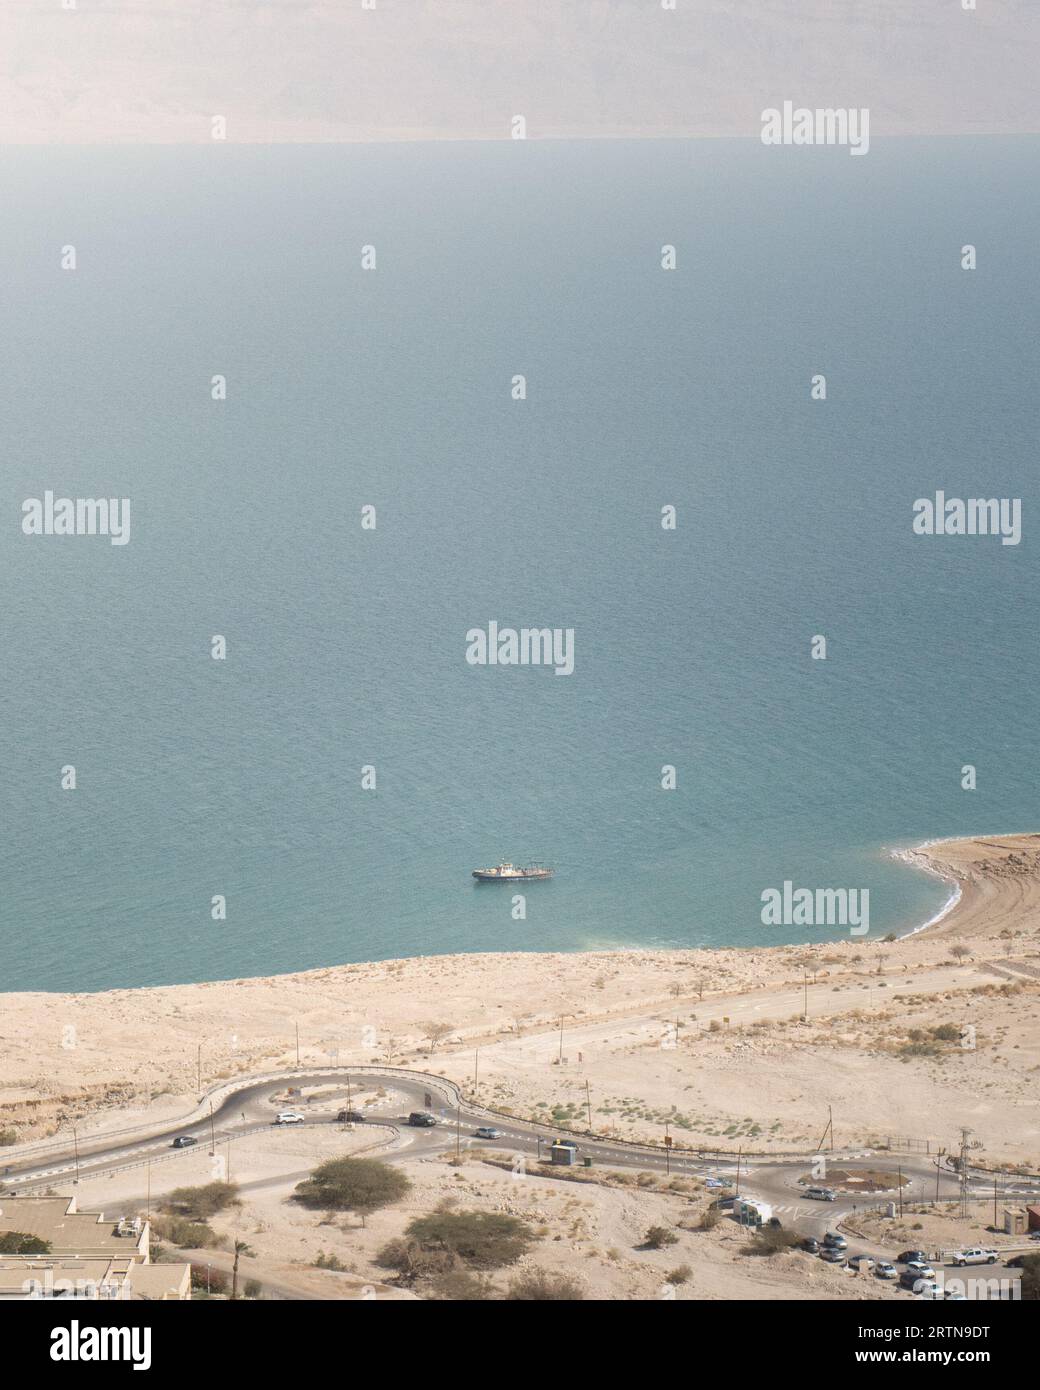 An aerial view of a boat on the surface of the Dead Sea in Israel, adjacent to the Ein Gedi beach Stock Photo